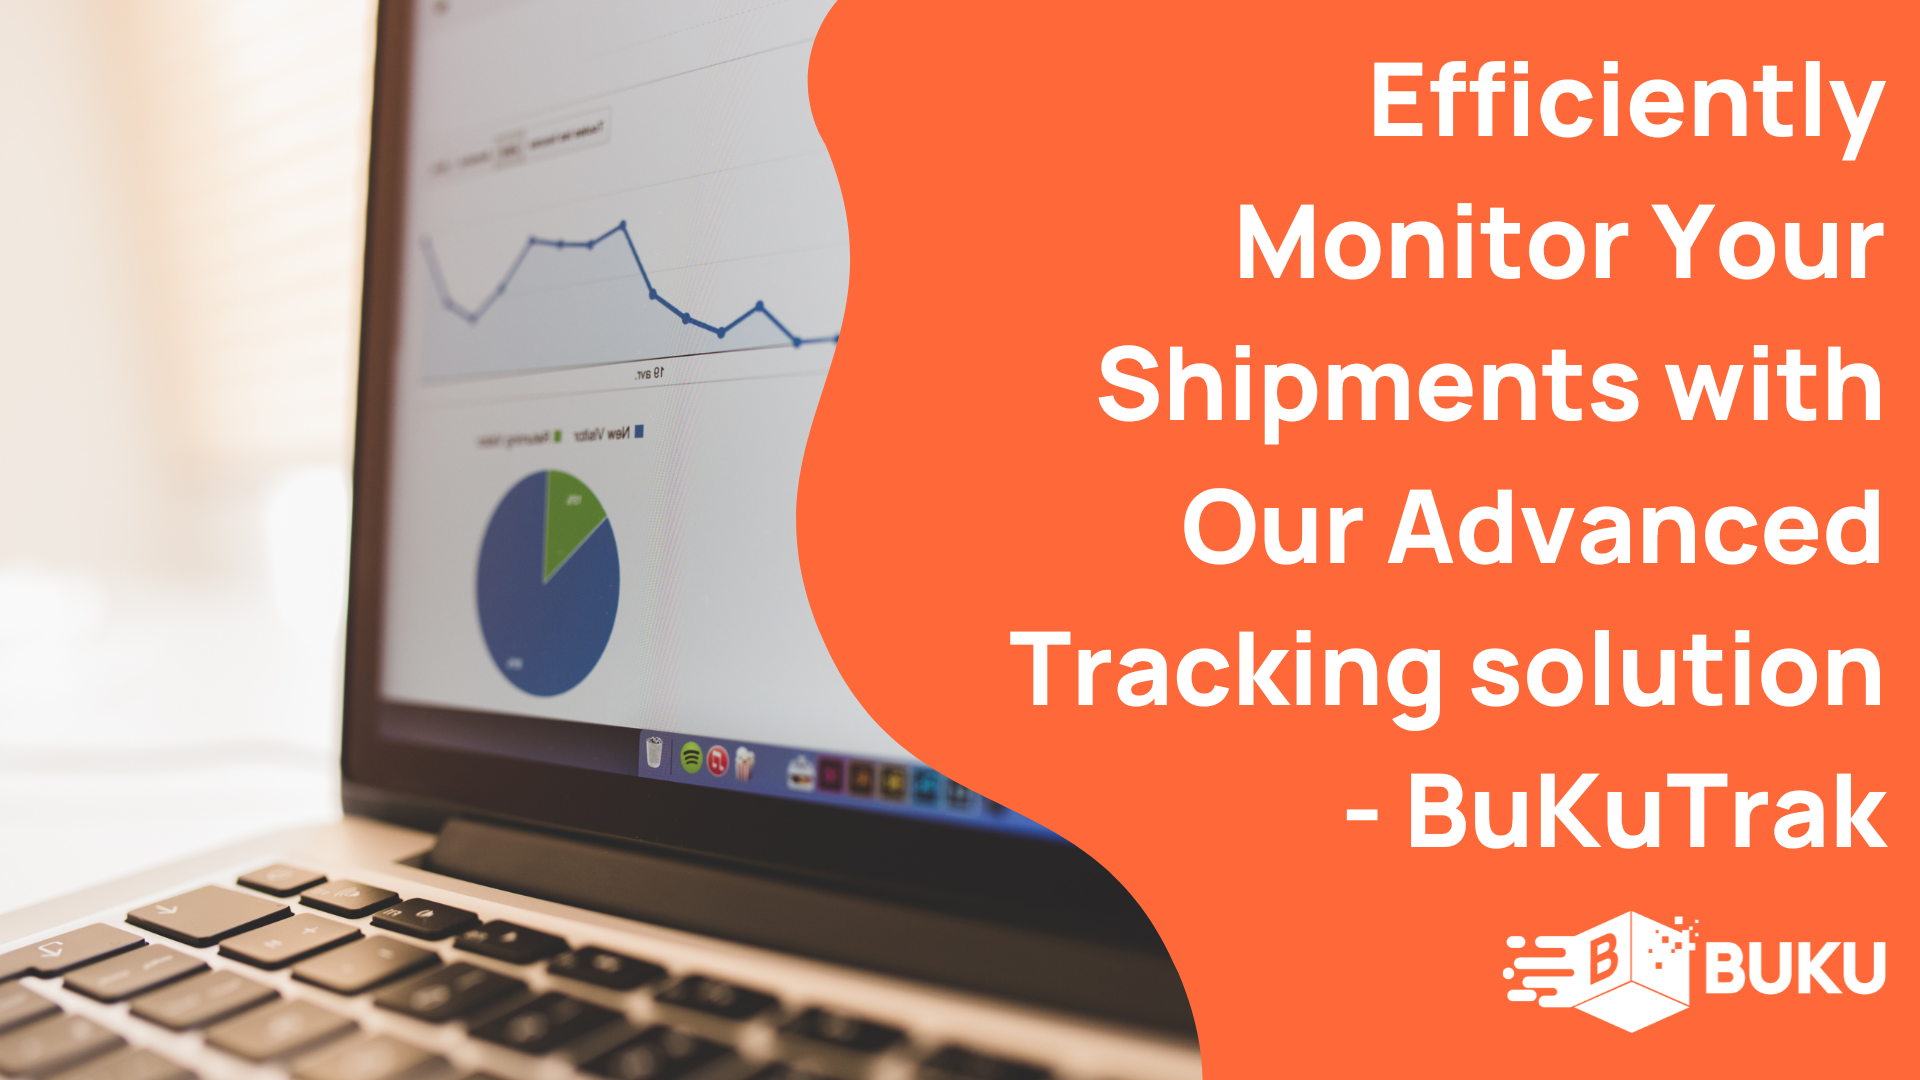 Efficiently Monitor Your Shipments with Our Advanced Tracking solution - BuKuTrak